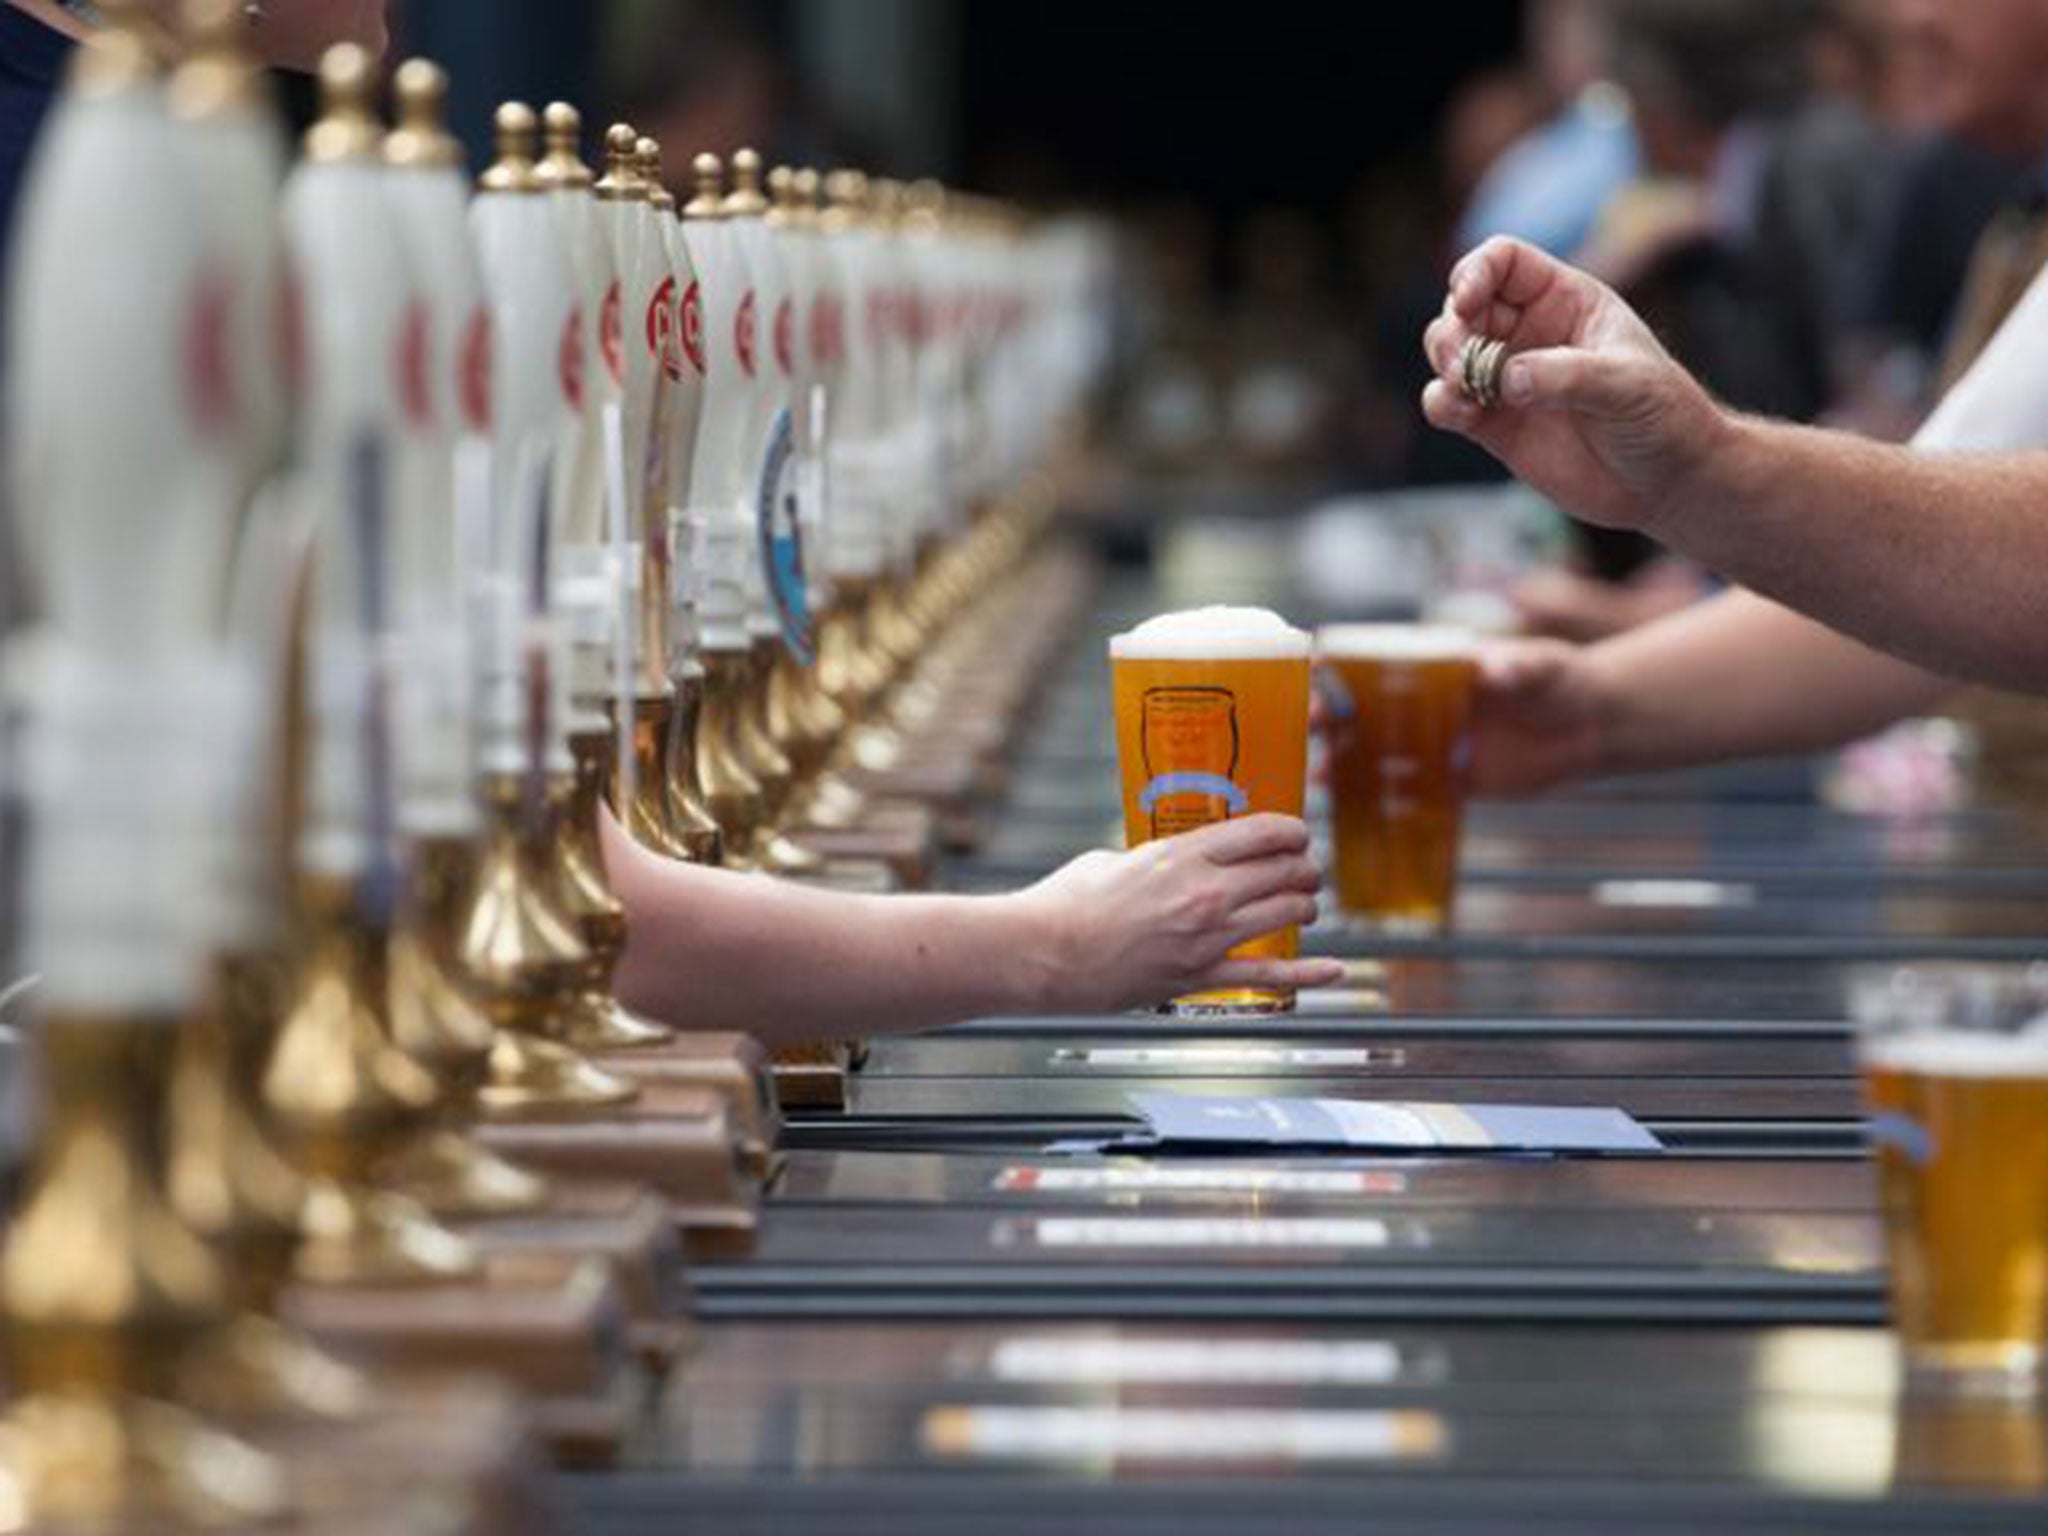 The number of breweries is at a 70-year high, showing the popularity of cask ale, which campaigners hope will reverse the decline in pubs